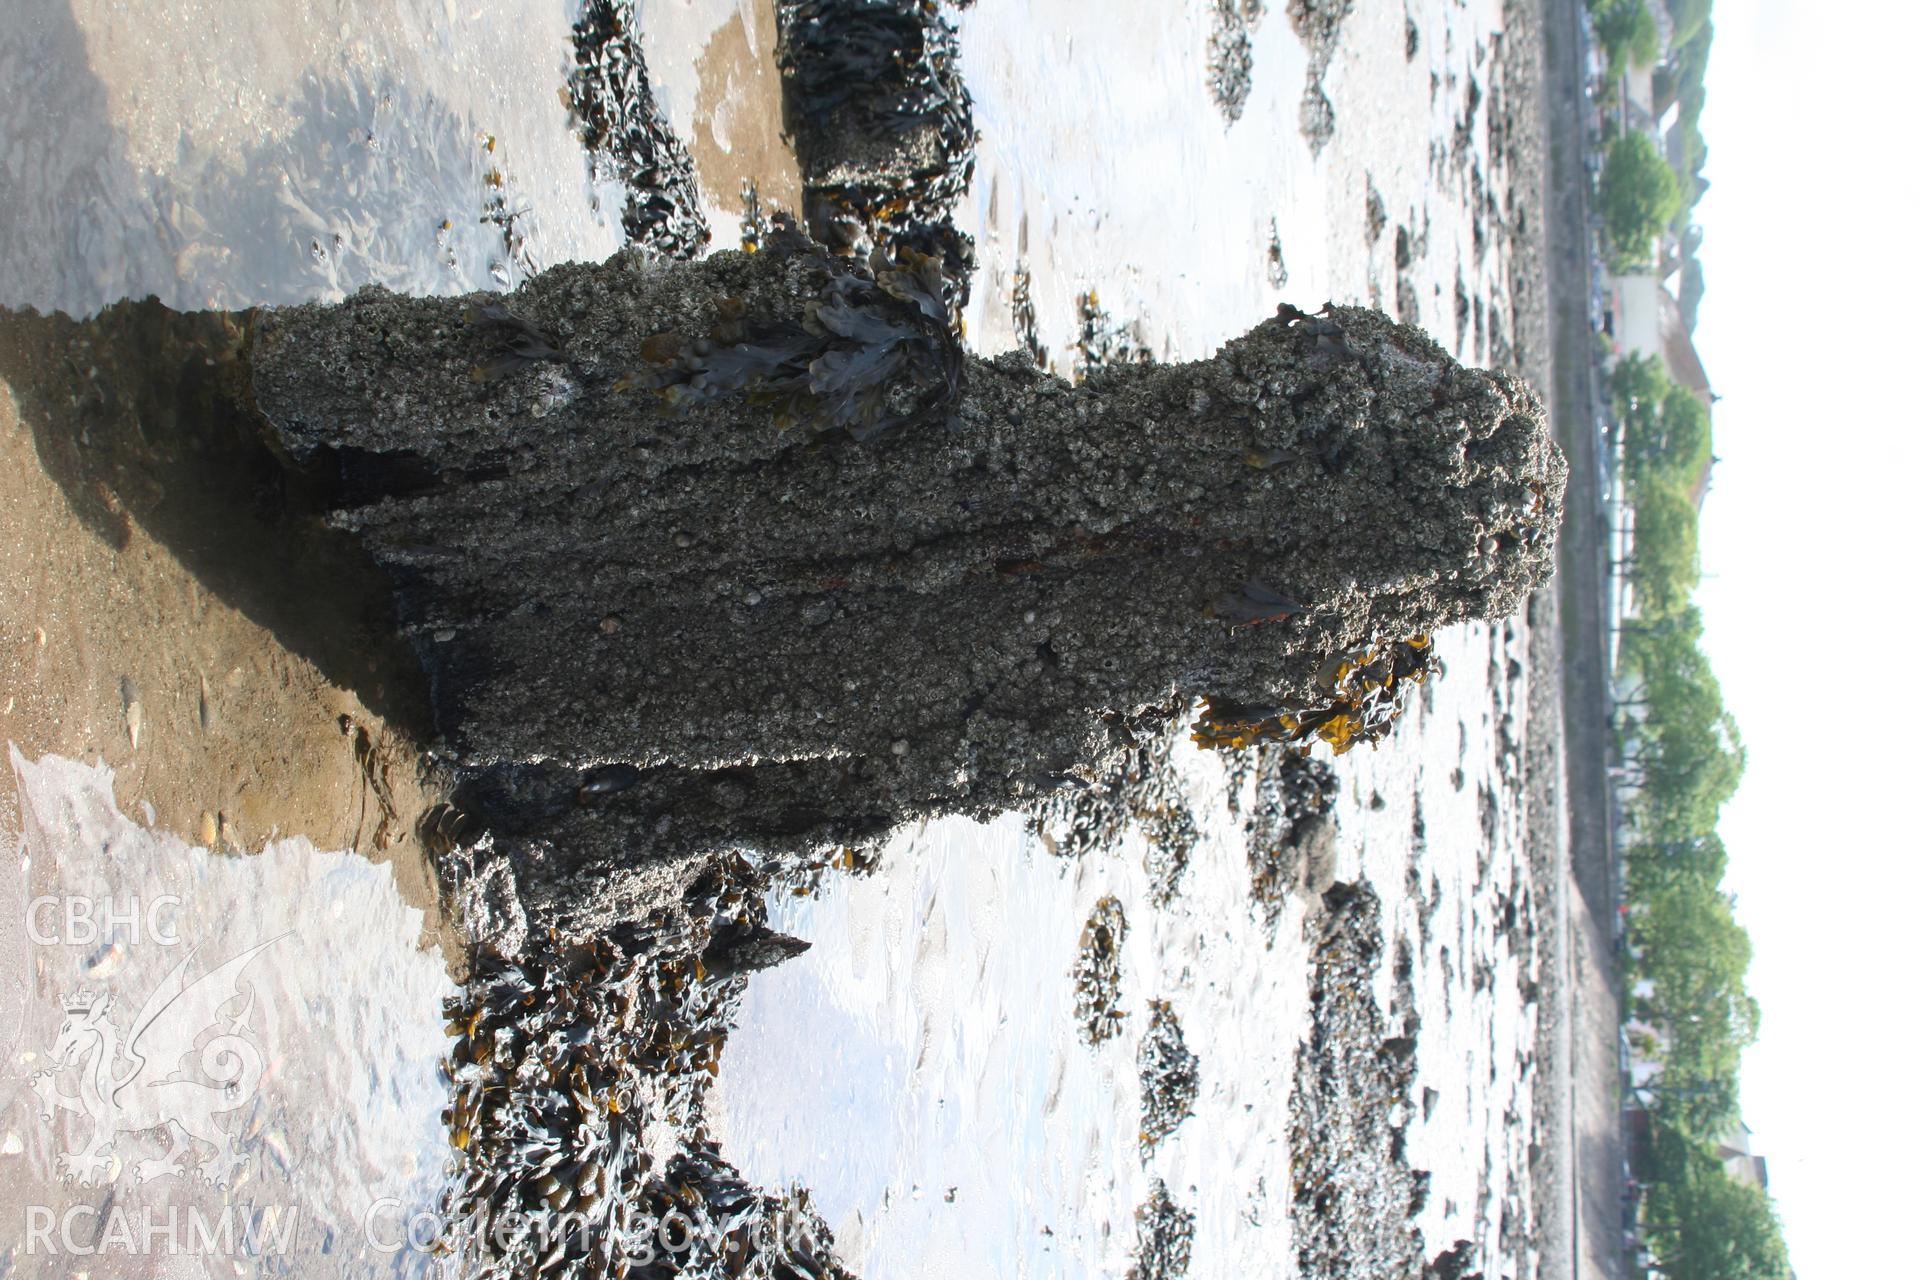 Wreck looking west. In foreground, close up of the remains of the stern post and rudder. In background, remains of the starboard lower frame protruding from the sand.Digital photographs of wreck on the foreshore at the Mumbles, Swansea